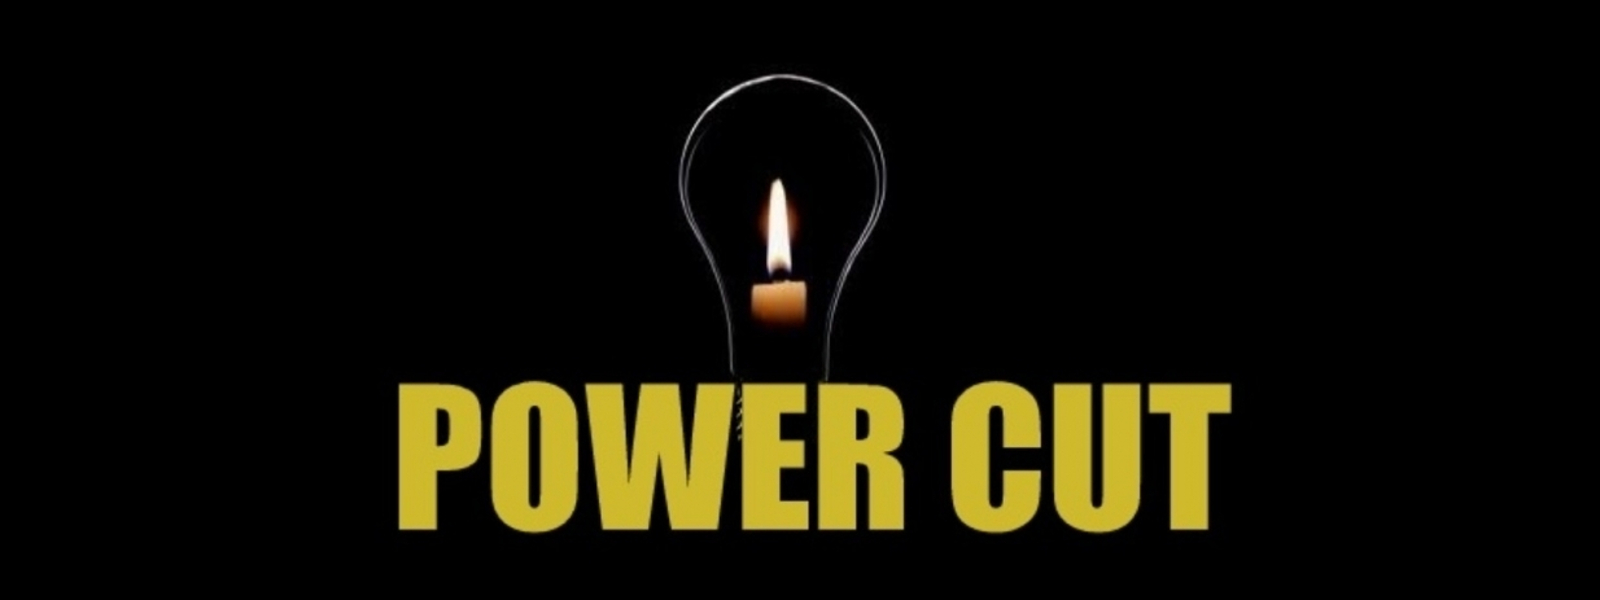 Power cuts for 18th, 19th and 20th approved